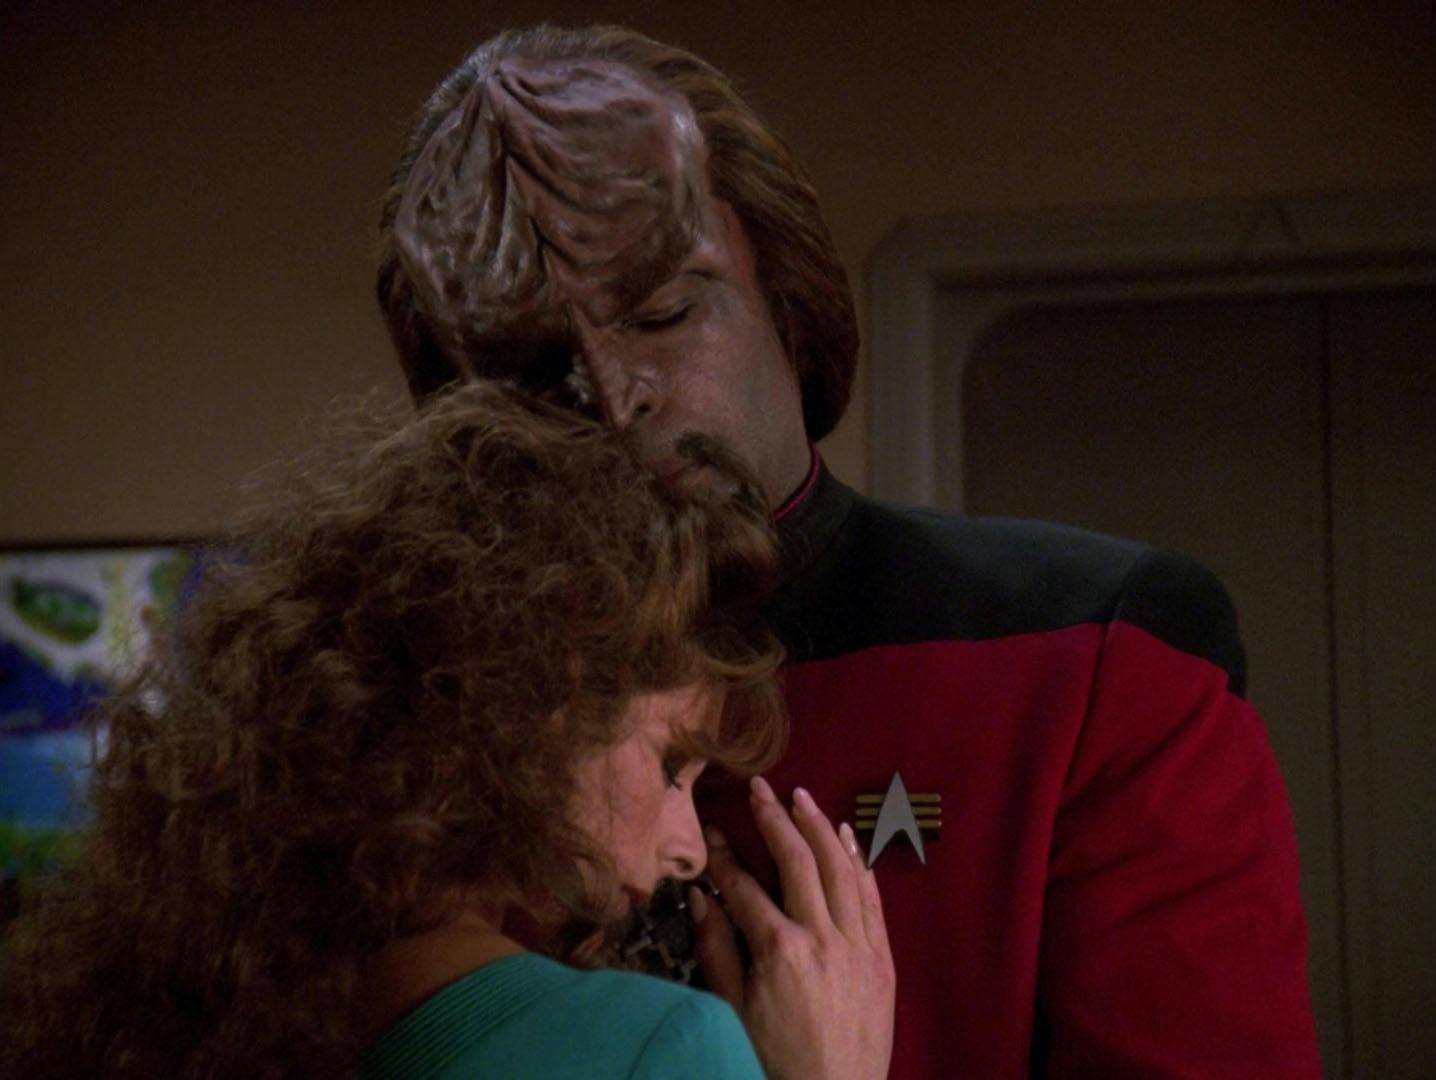 Worf holds Deanna Troi in a warm embrace as he rests gently on her head